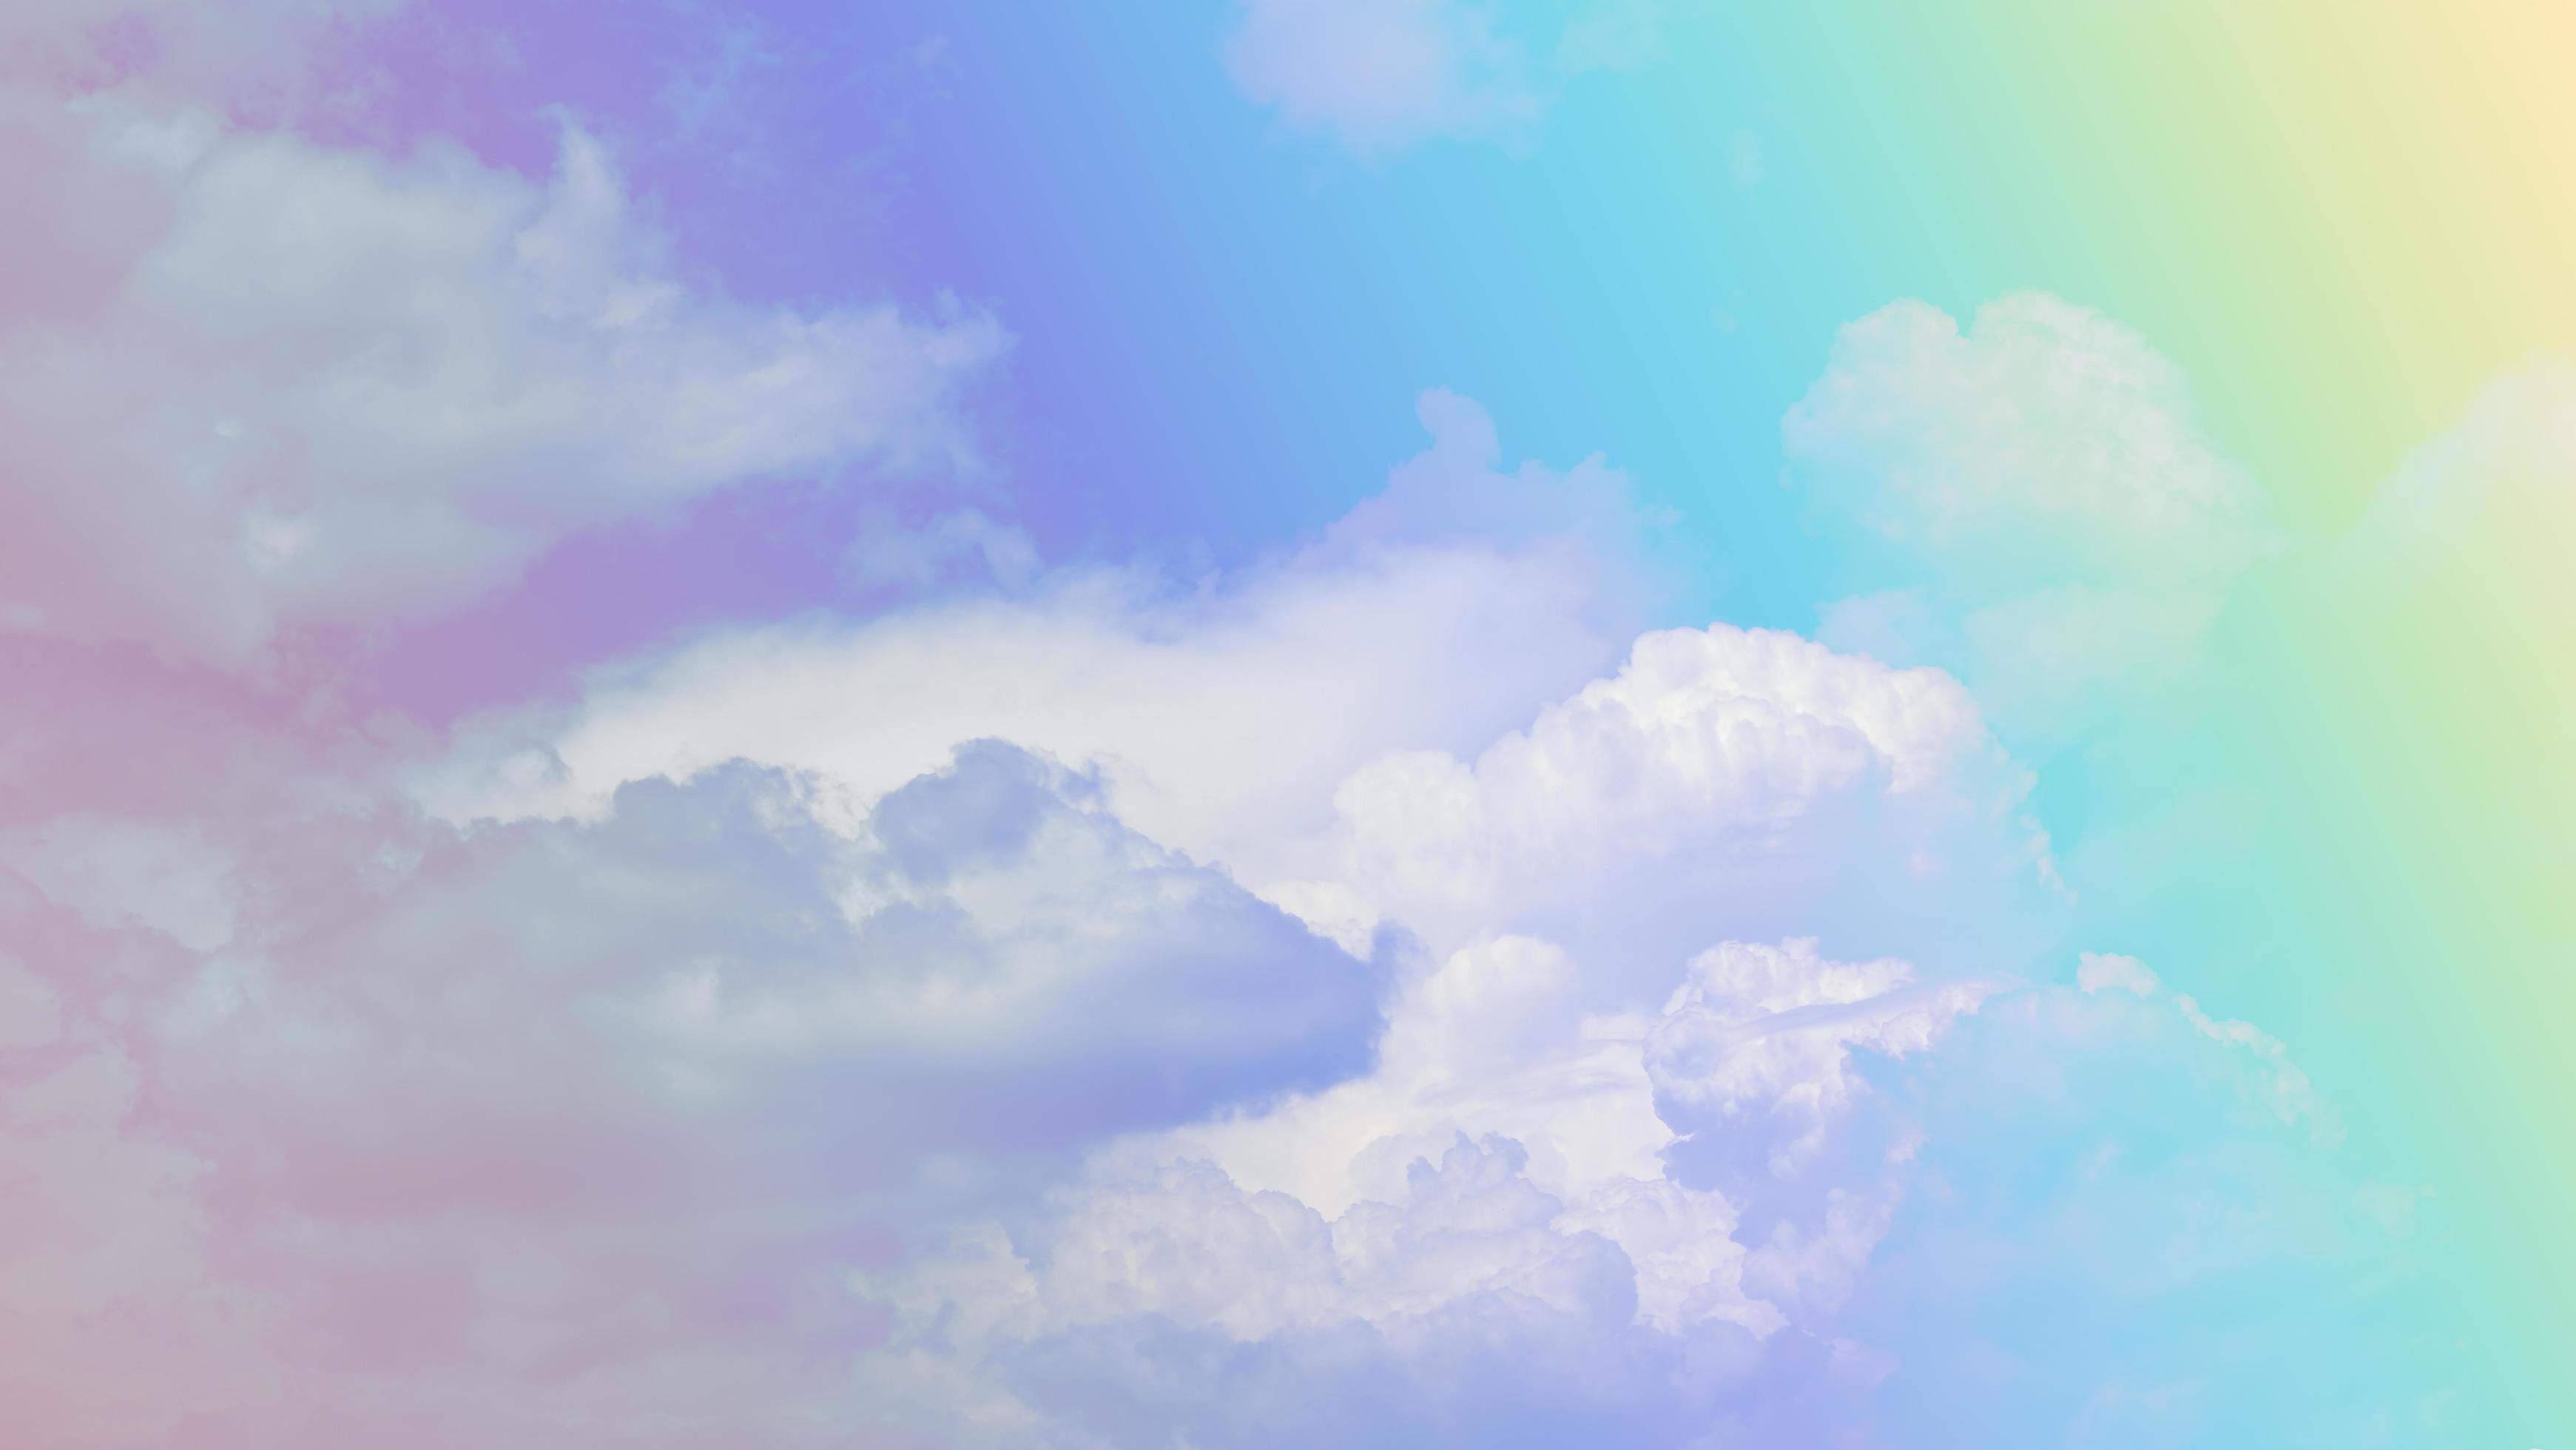 beauty sweet pastel yellow purple colorful with fluffy clouds on sky. multi color rainbow image. abstract fantasy growing light